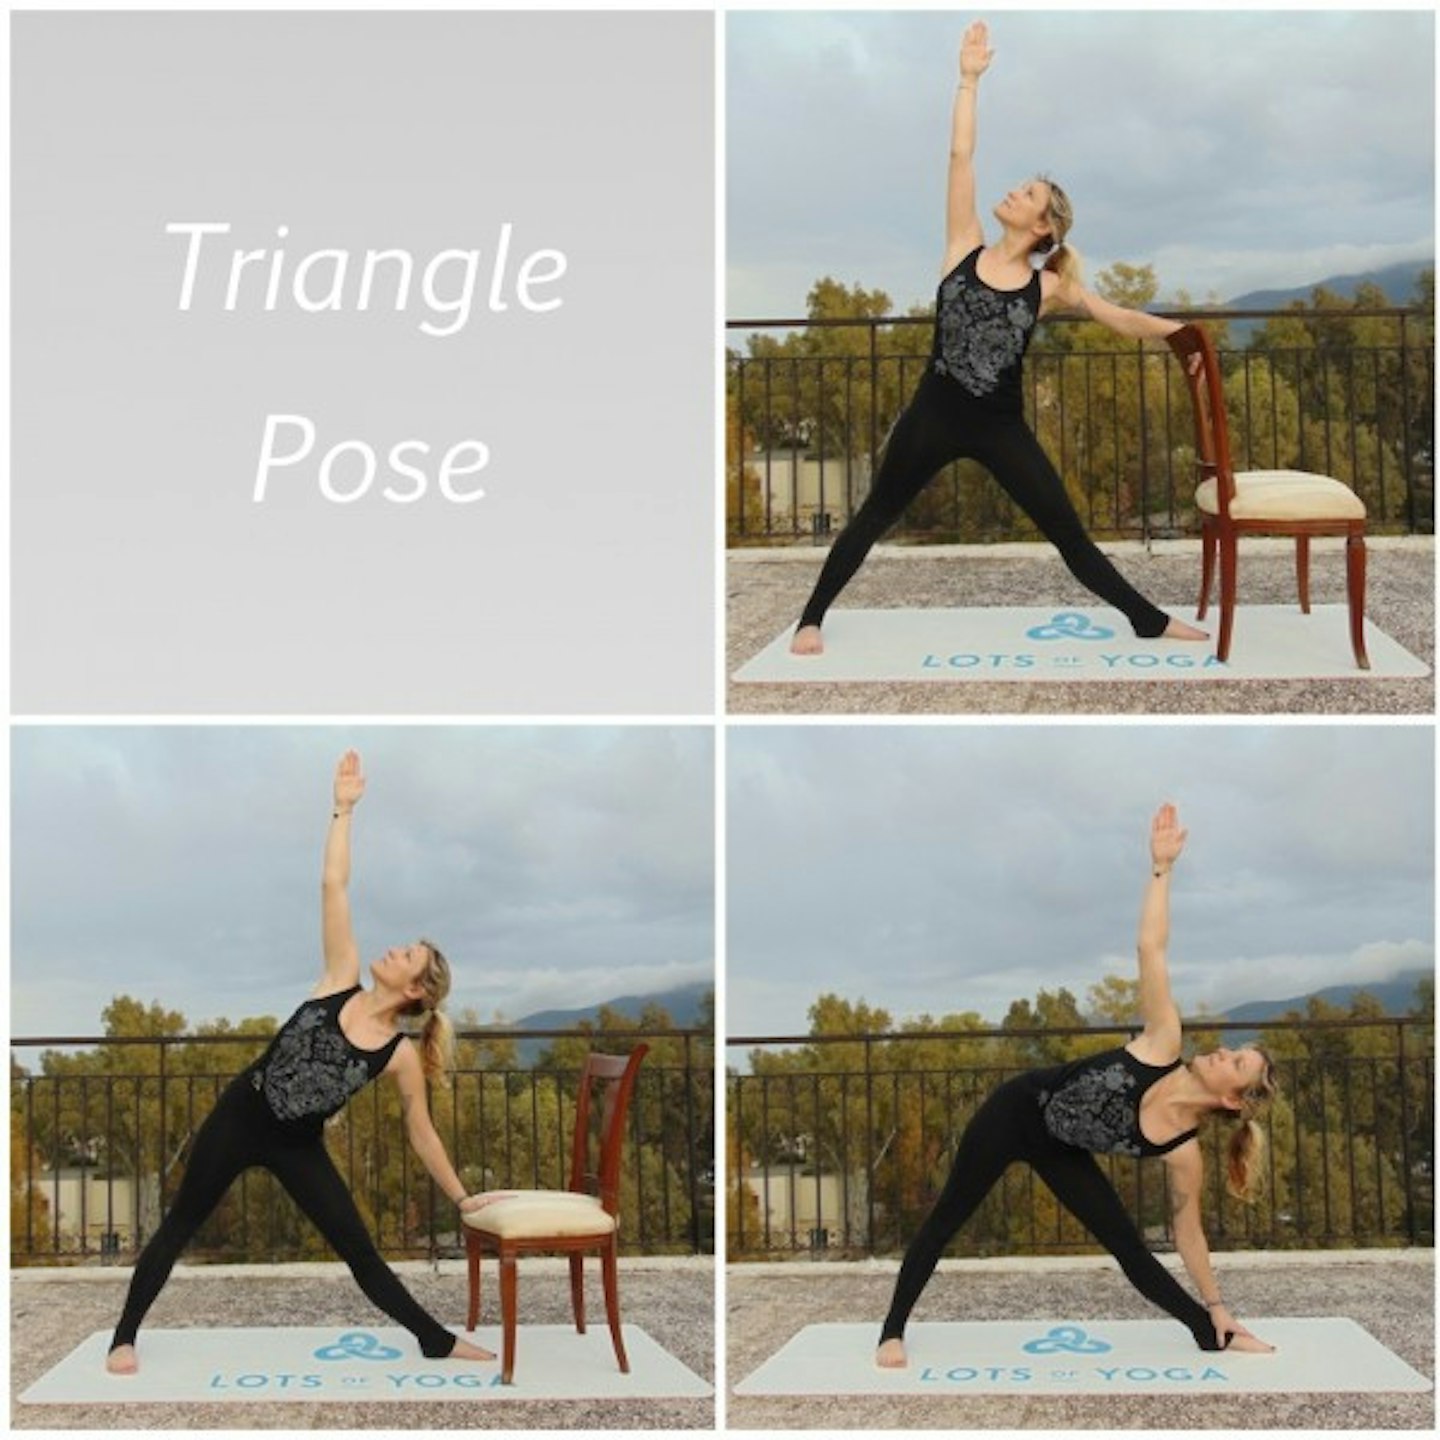 triangle-pose-lots-of-yoga-over-50-yours.co_.uk_-600x600